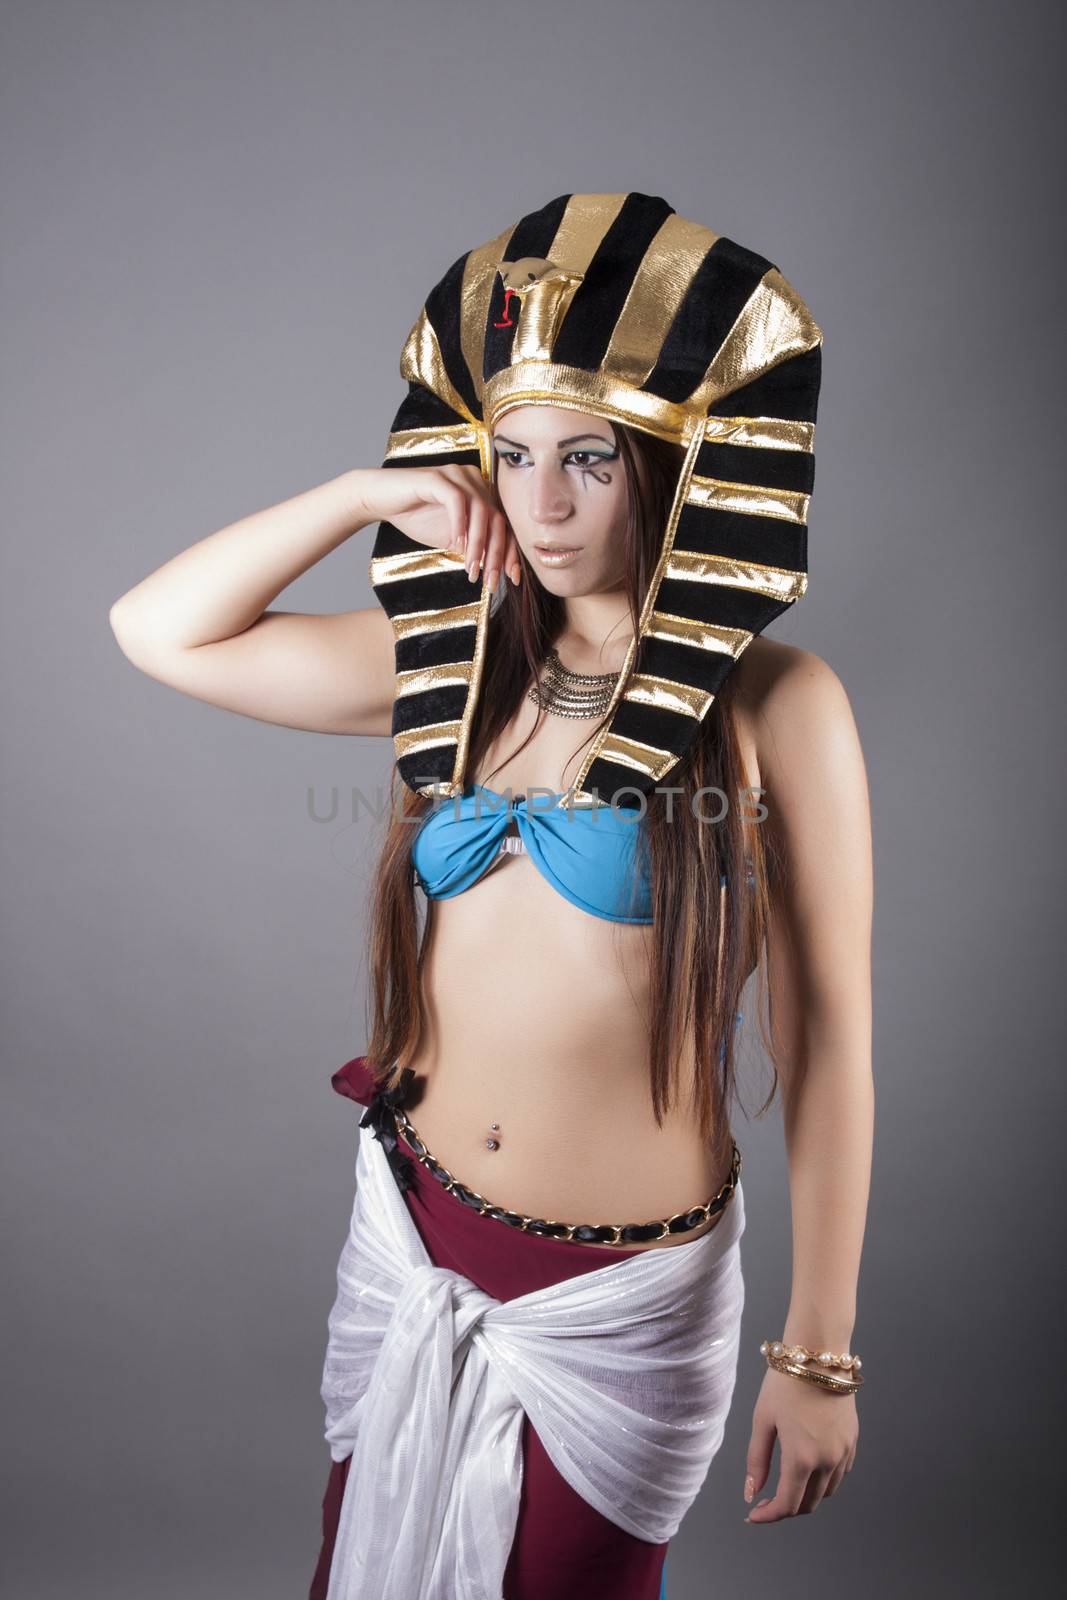 Cleopatra the queen of egypt by dukibu